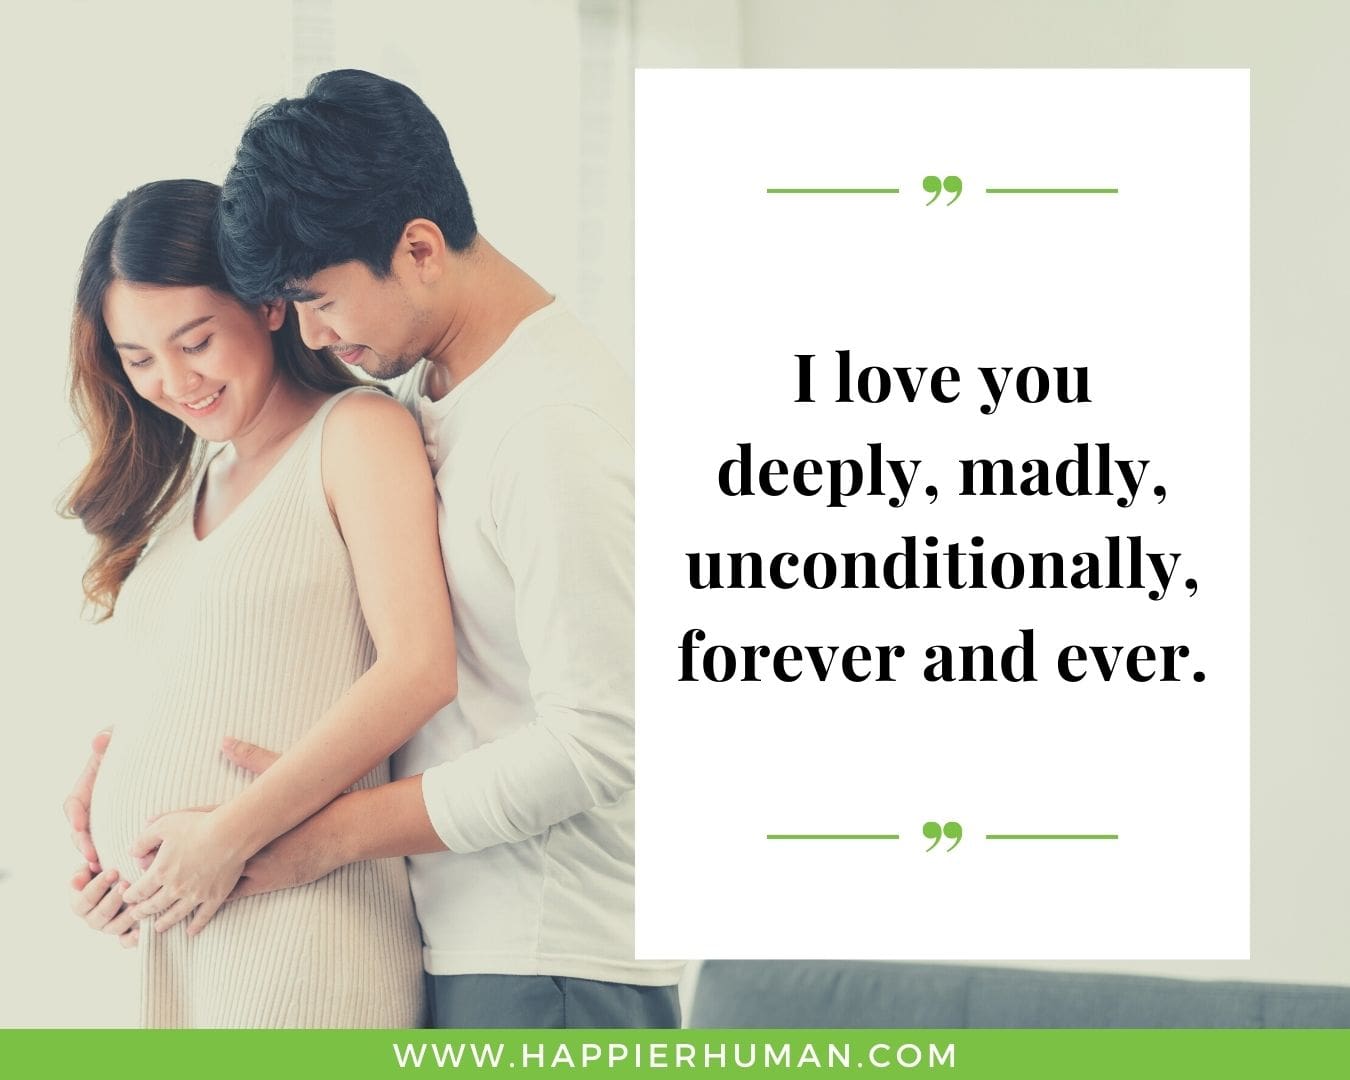 Unconditional Love Quotes for Her - “I love you deeply, madly, unconditionally, forever and ever.”